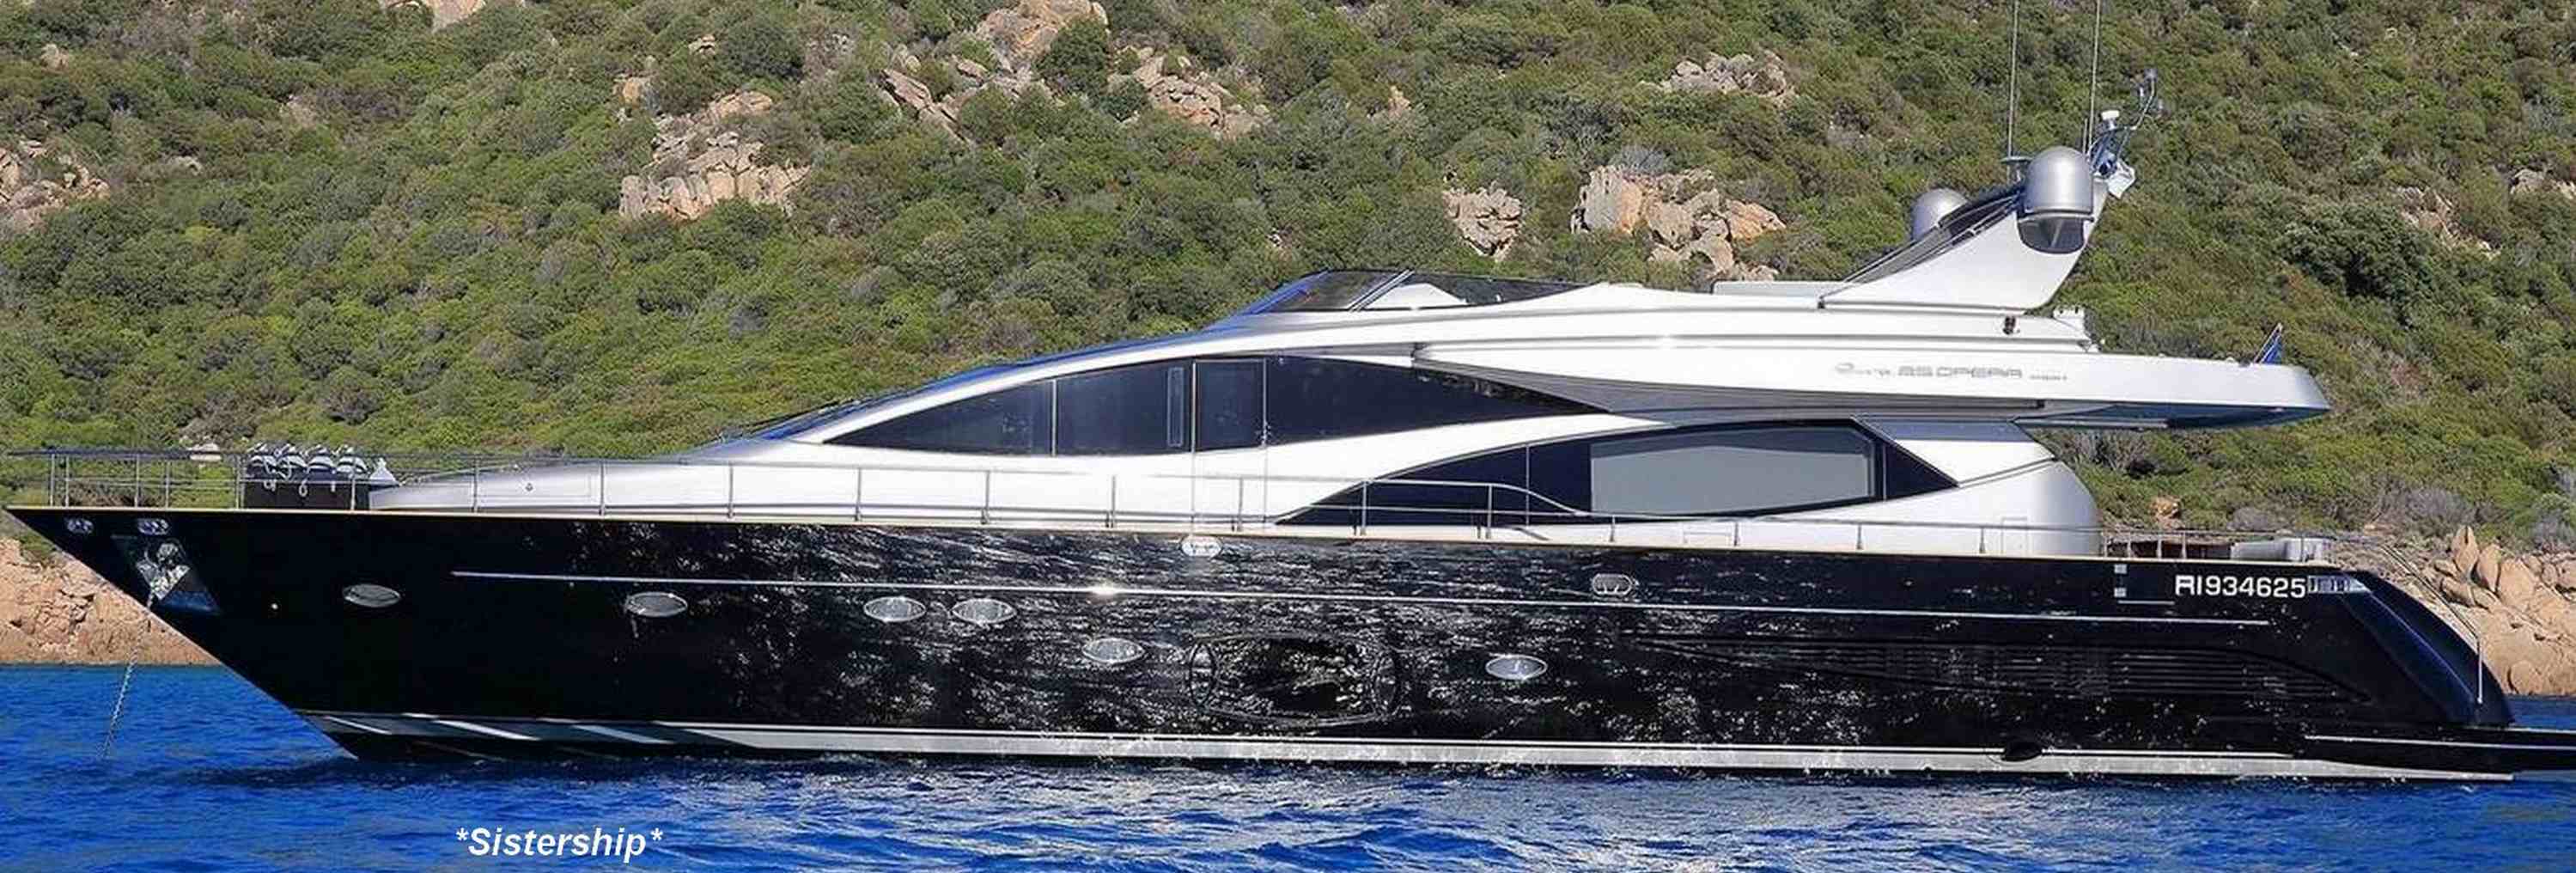 4 FIVE : New yacht for Sale